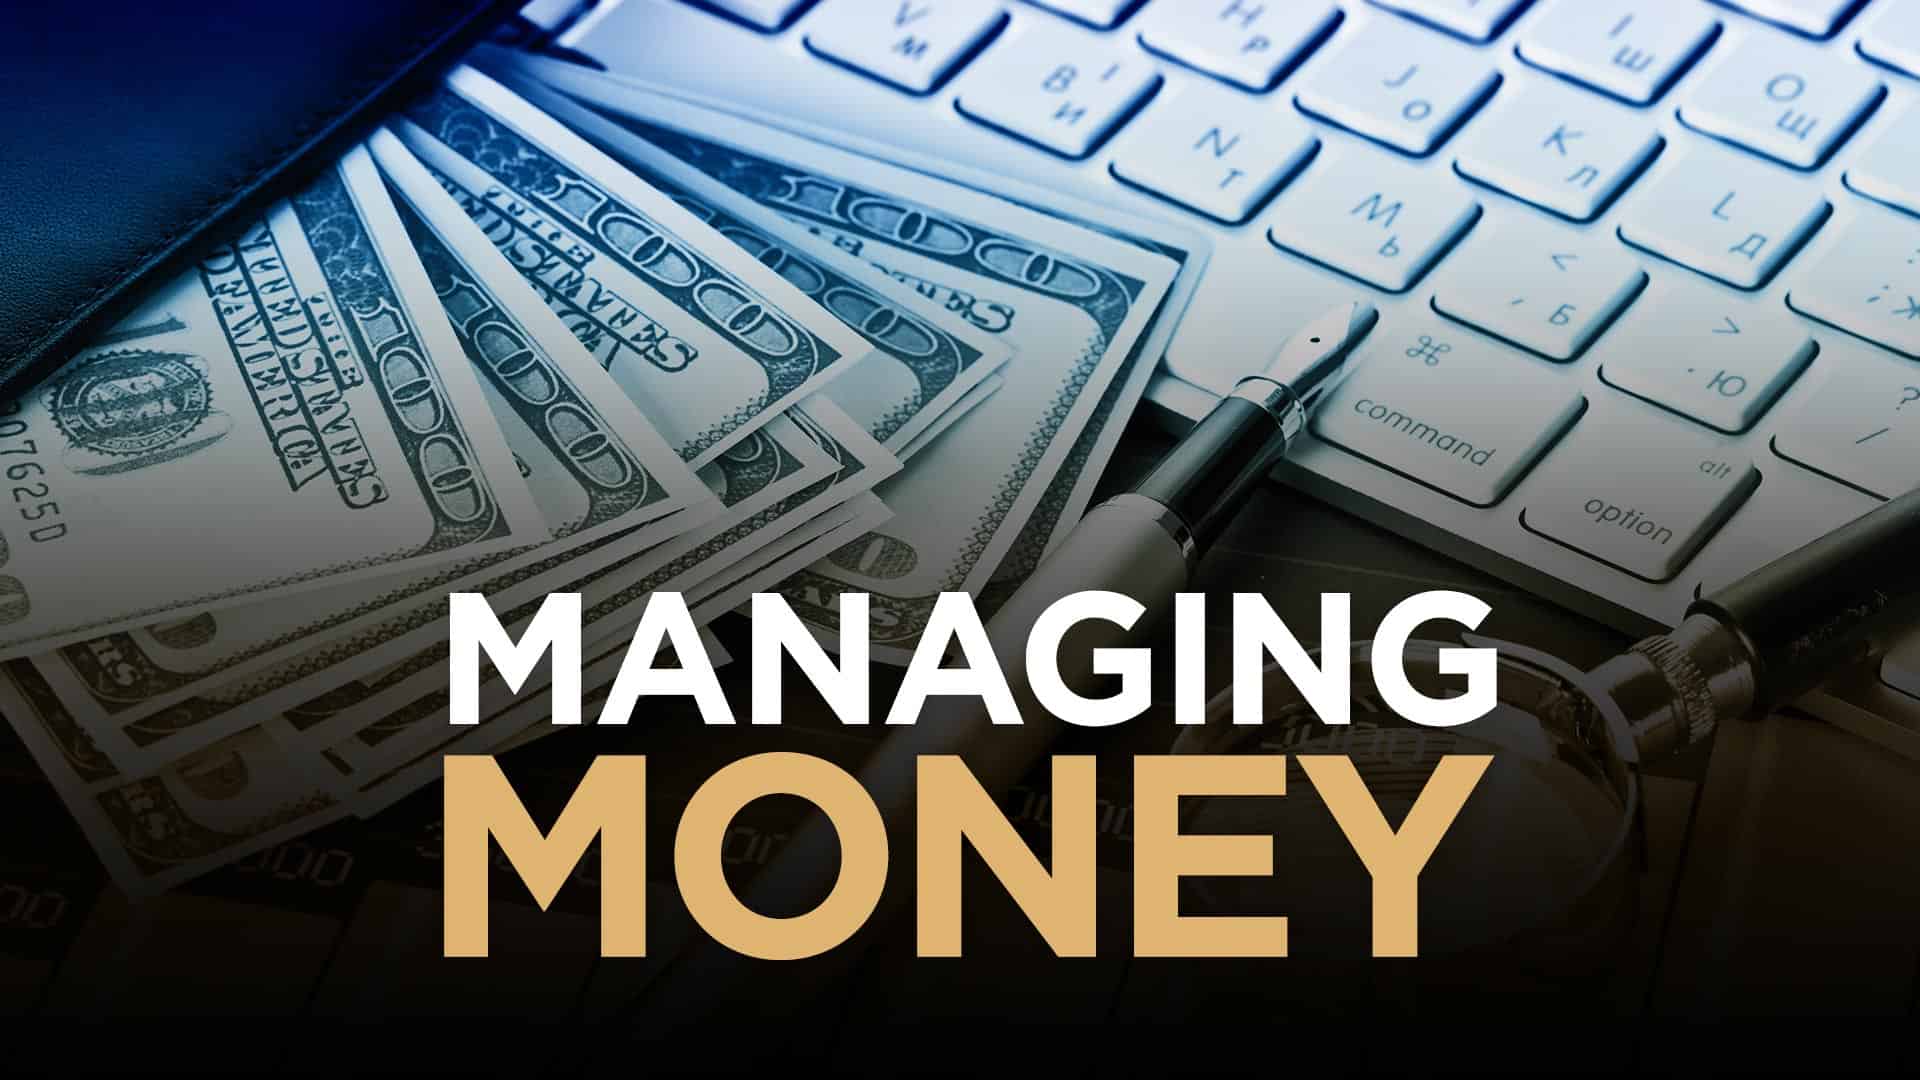 What To Do When You Are Not Good At Managing Your Money